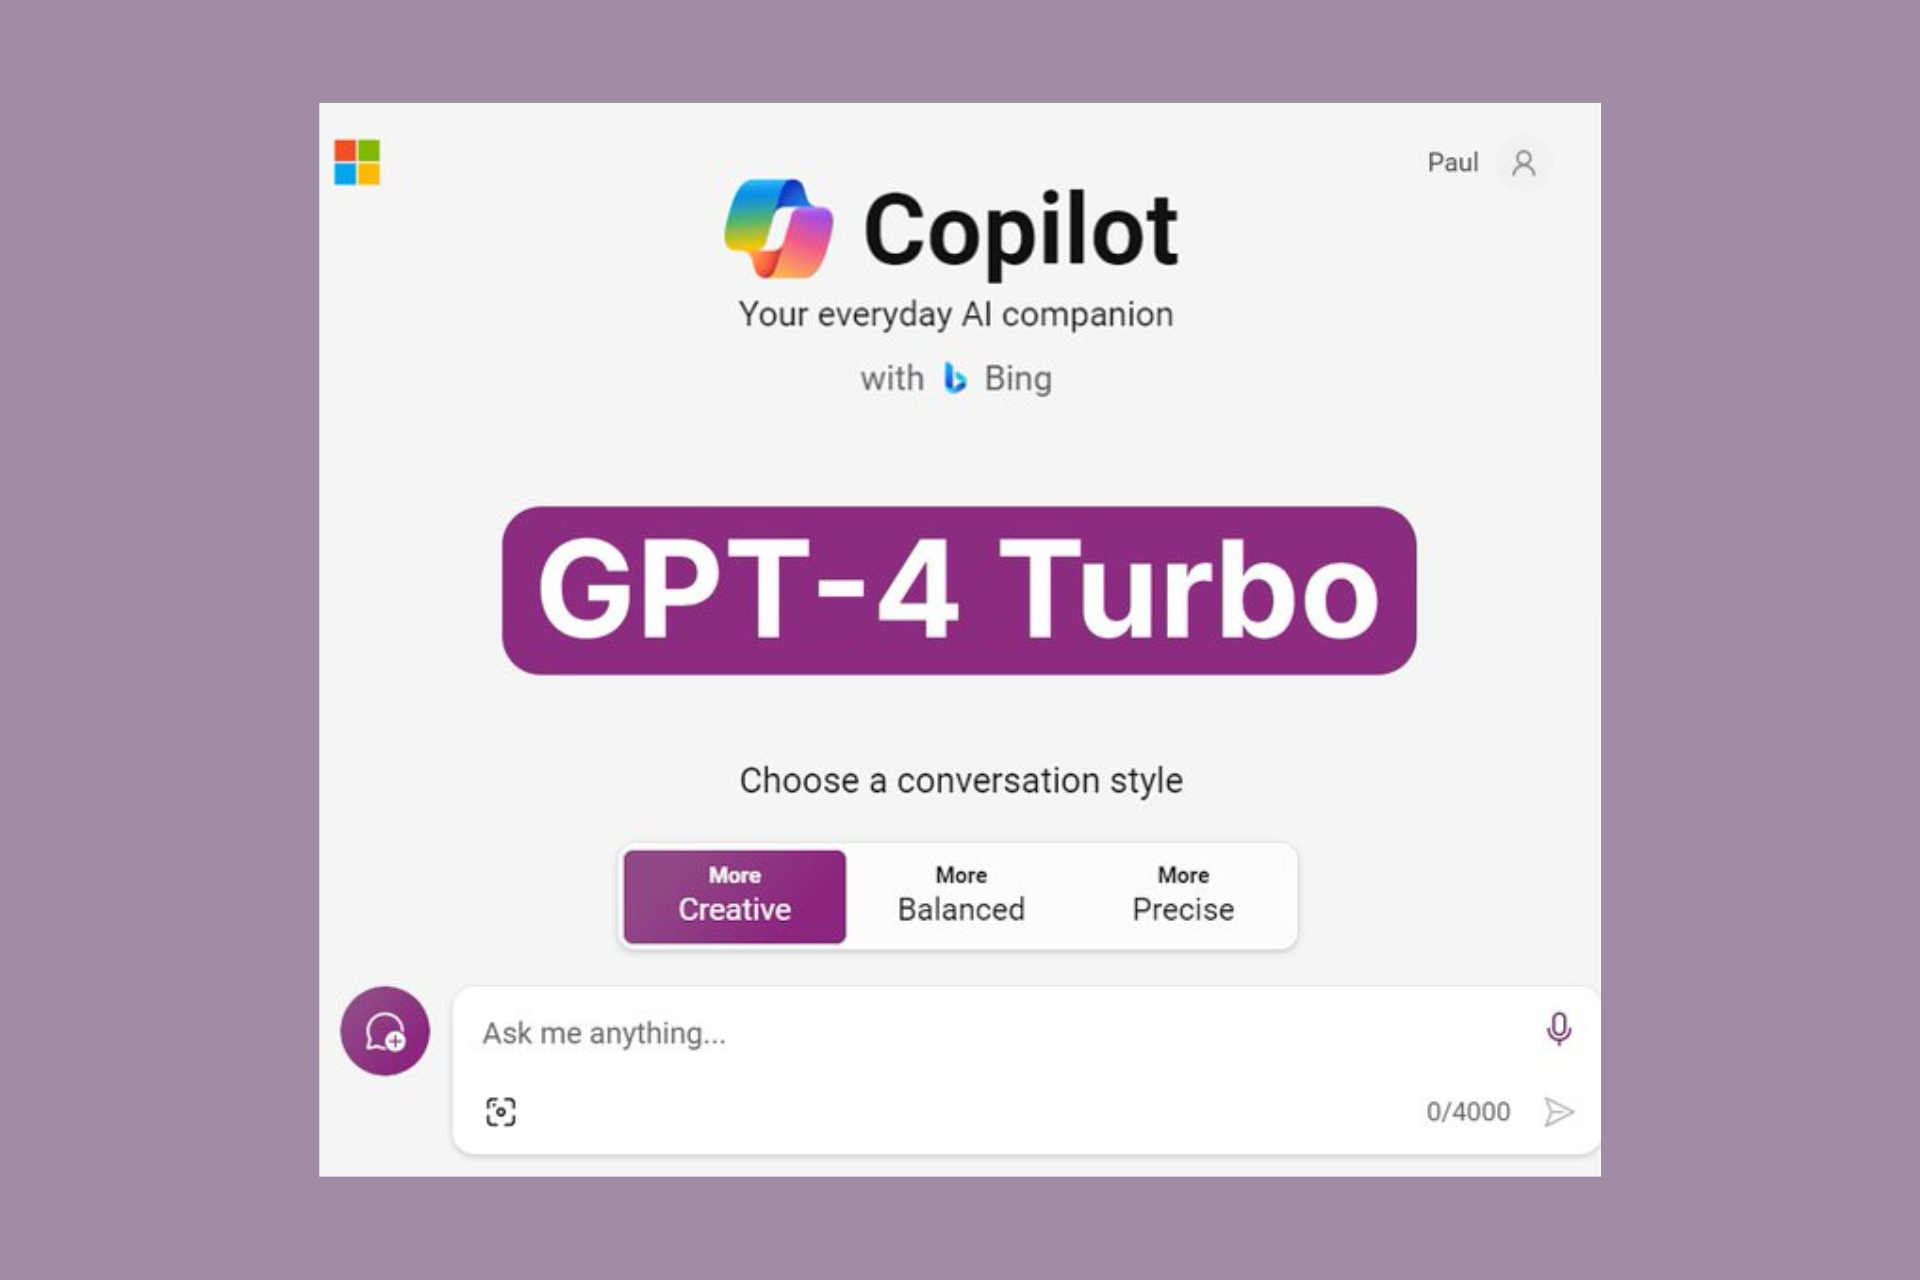 Copilot now has GPT-4 Turbo for free